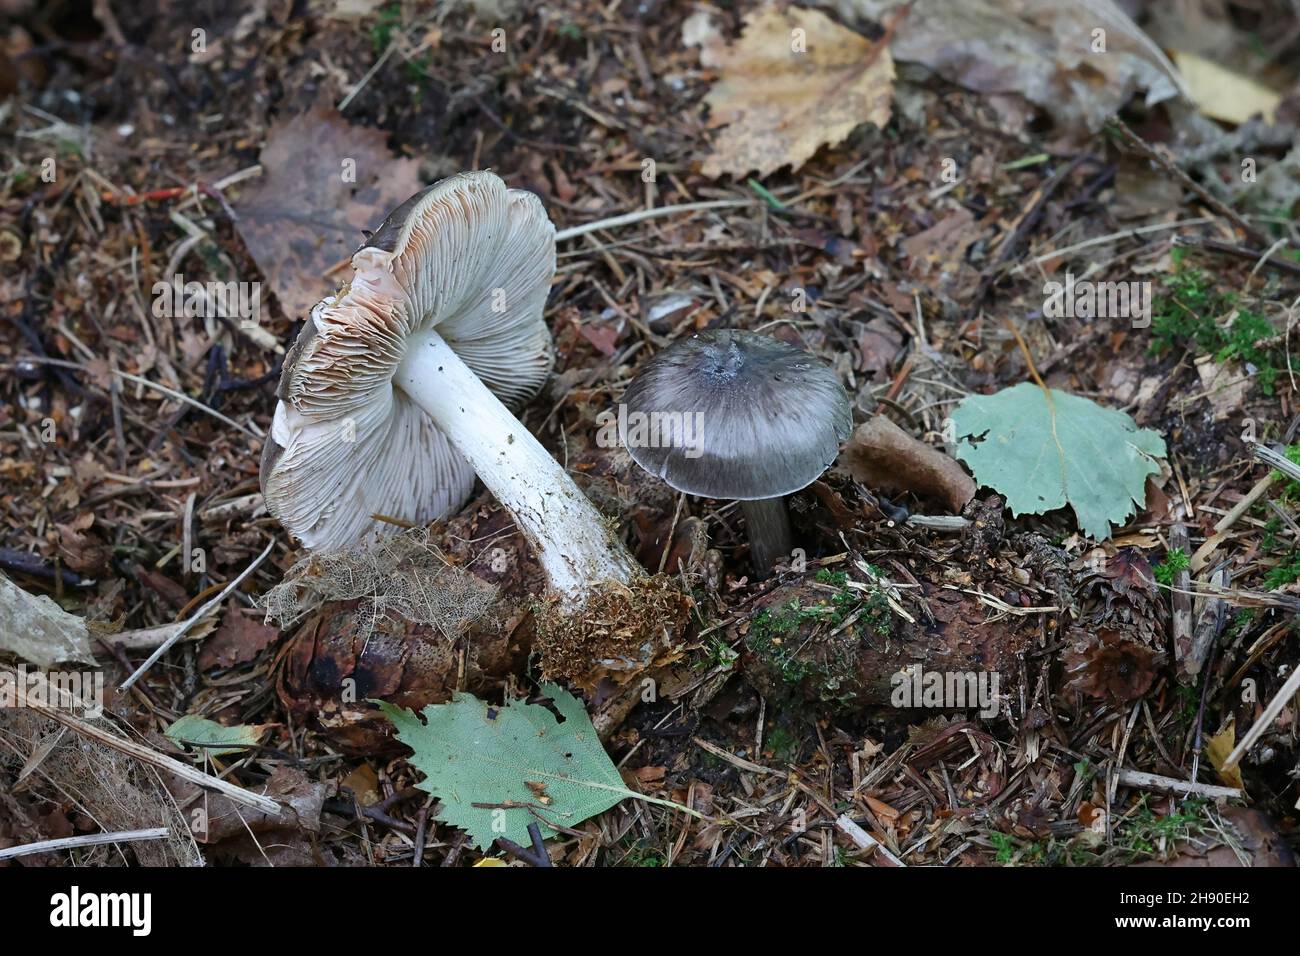 Pluteus pouzarianus, known as conifer shield, wild mushroom from Finland Stock Photo